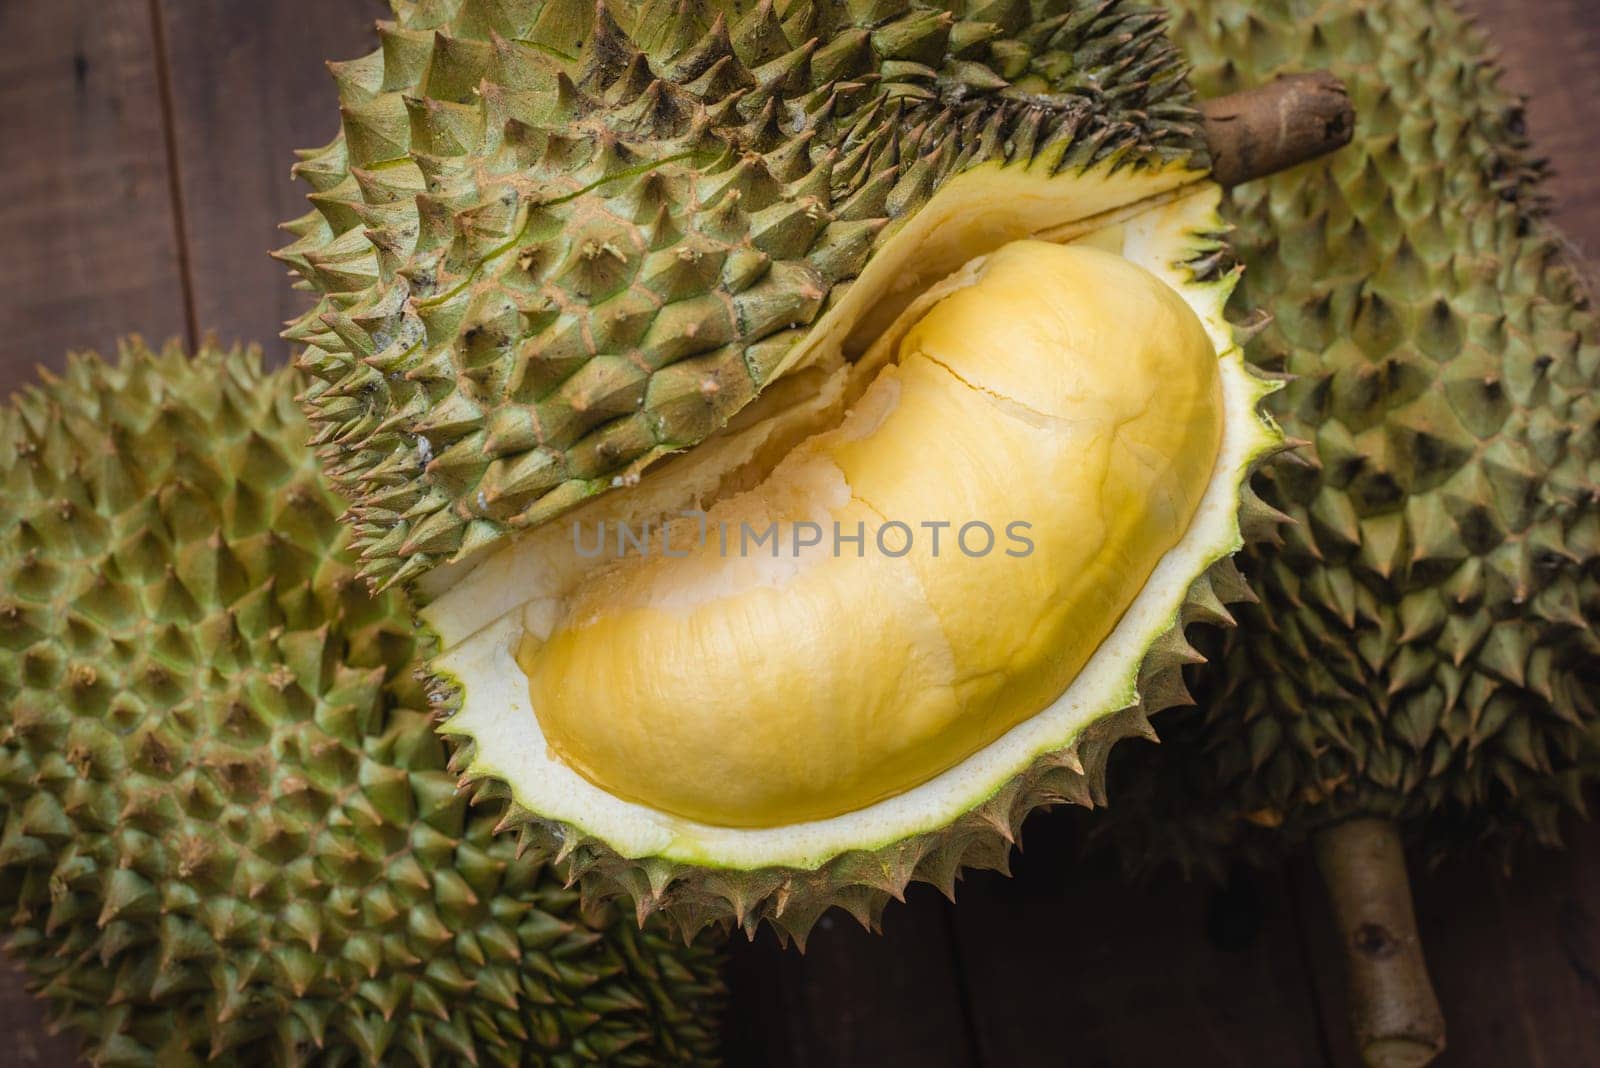 Mon Thong durian fruit on wooden plank background. Regarded by many people in southeast asia as the king of fruits.